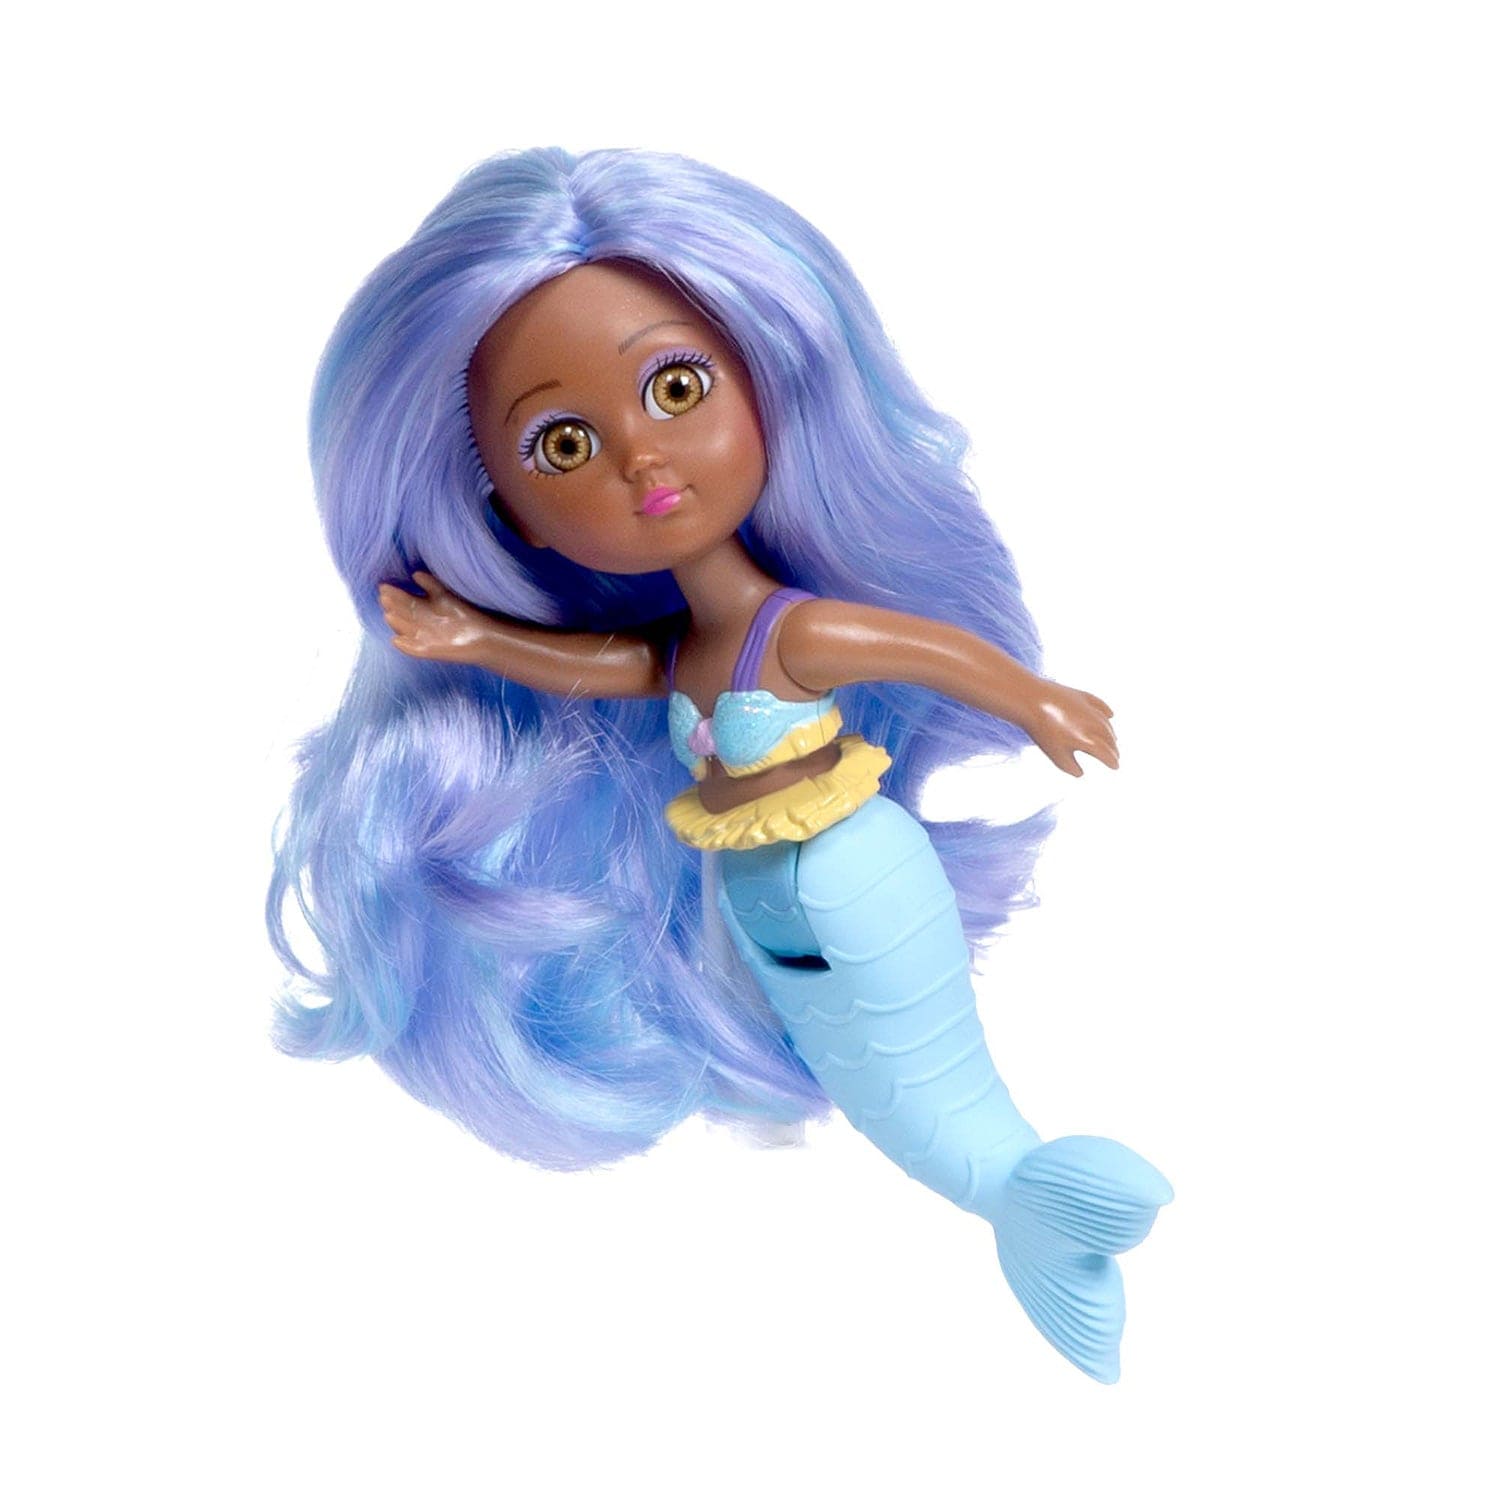  Hair Accessories Mermaid Toys Gifts for Girls: 6 7 8 9